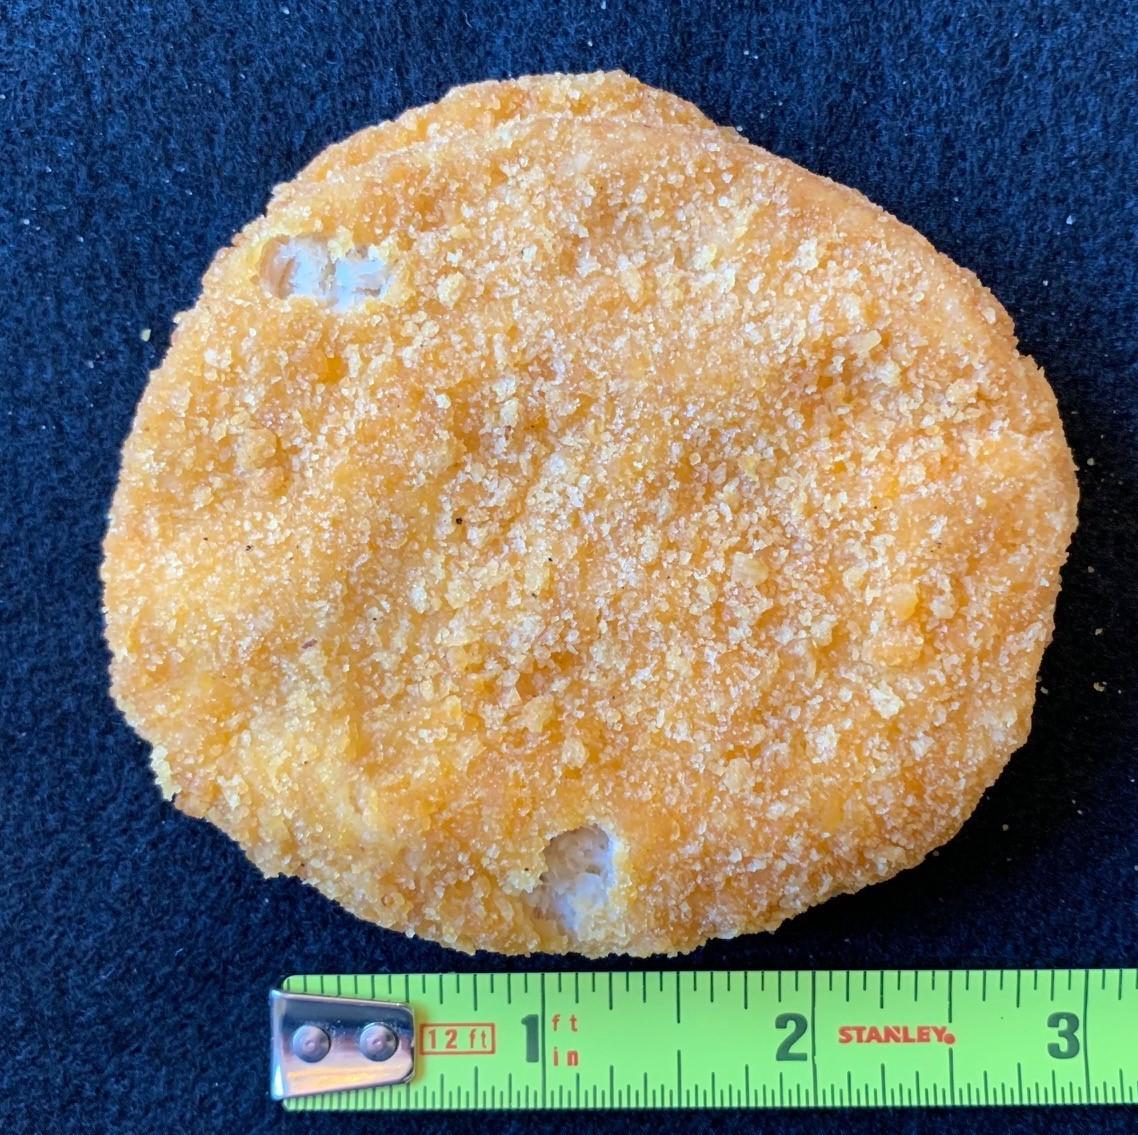 Figure 3. Chicken patty with two breading voids each less than half an inch so there is no defect